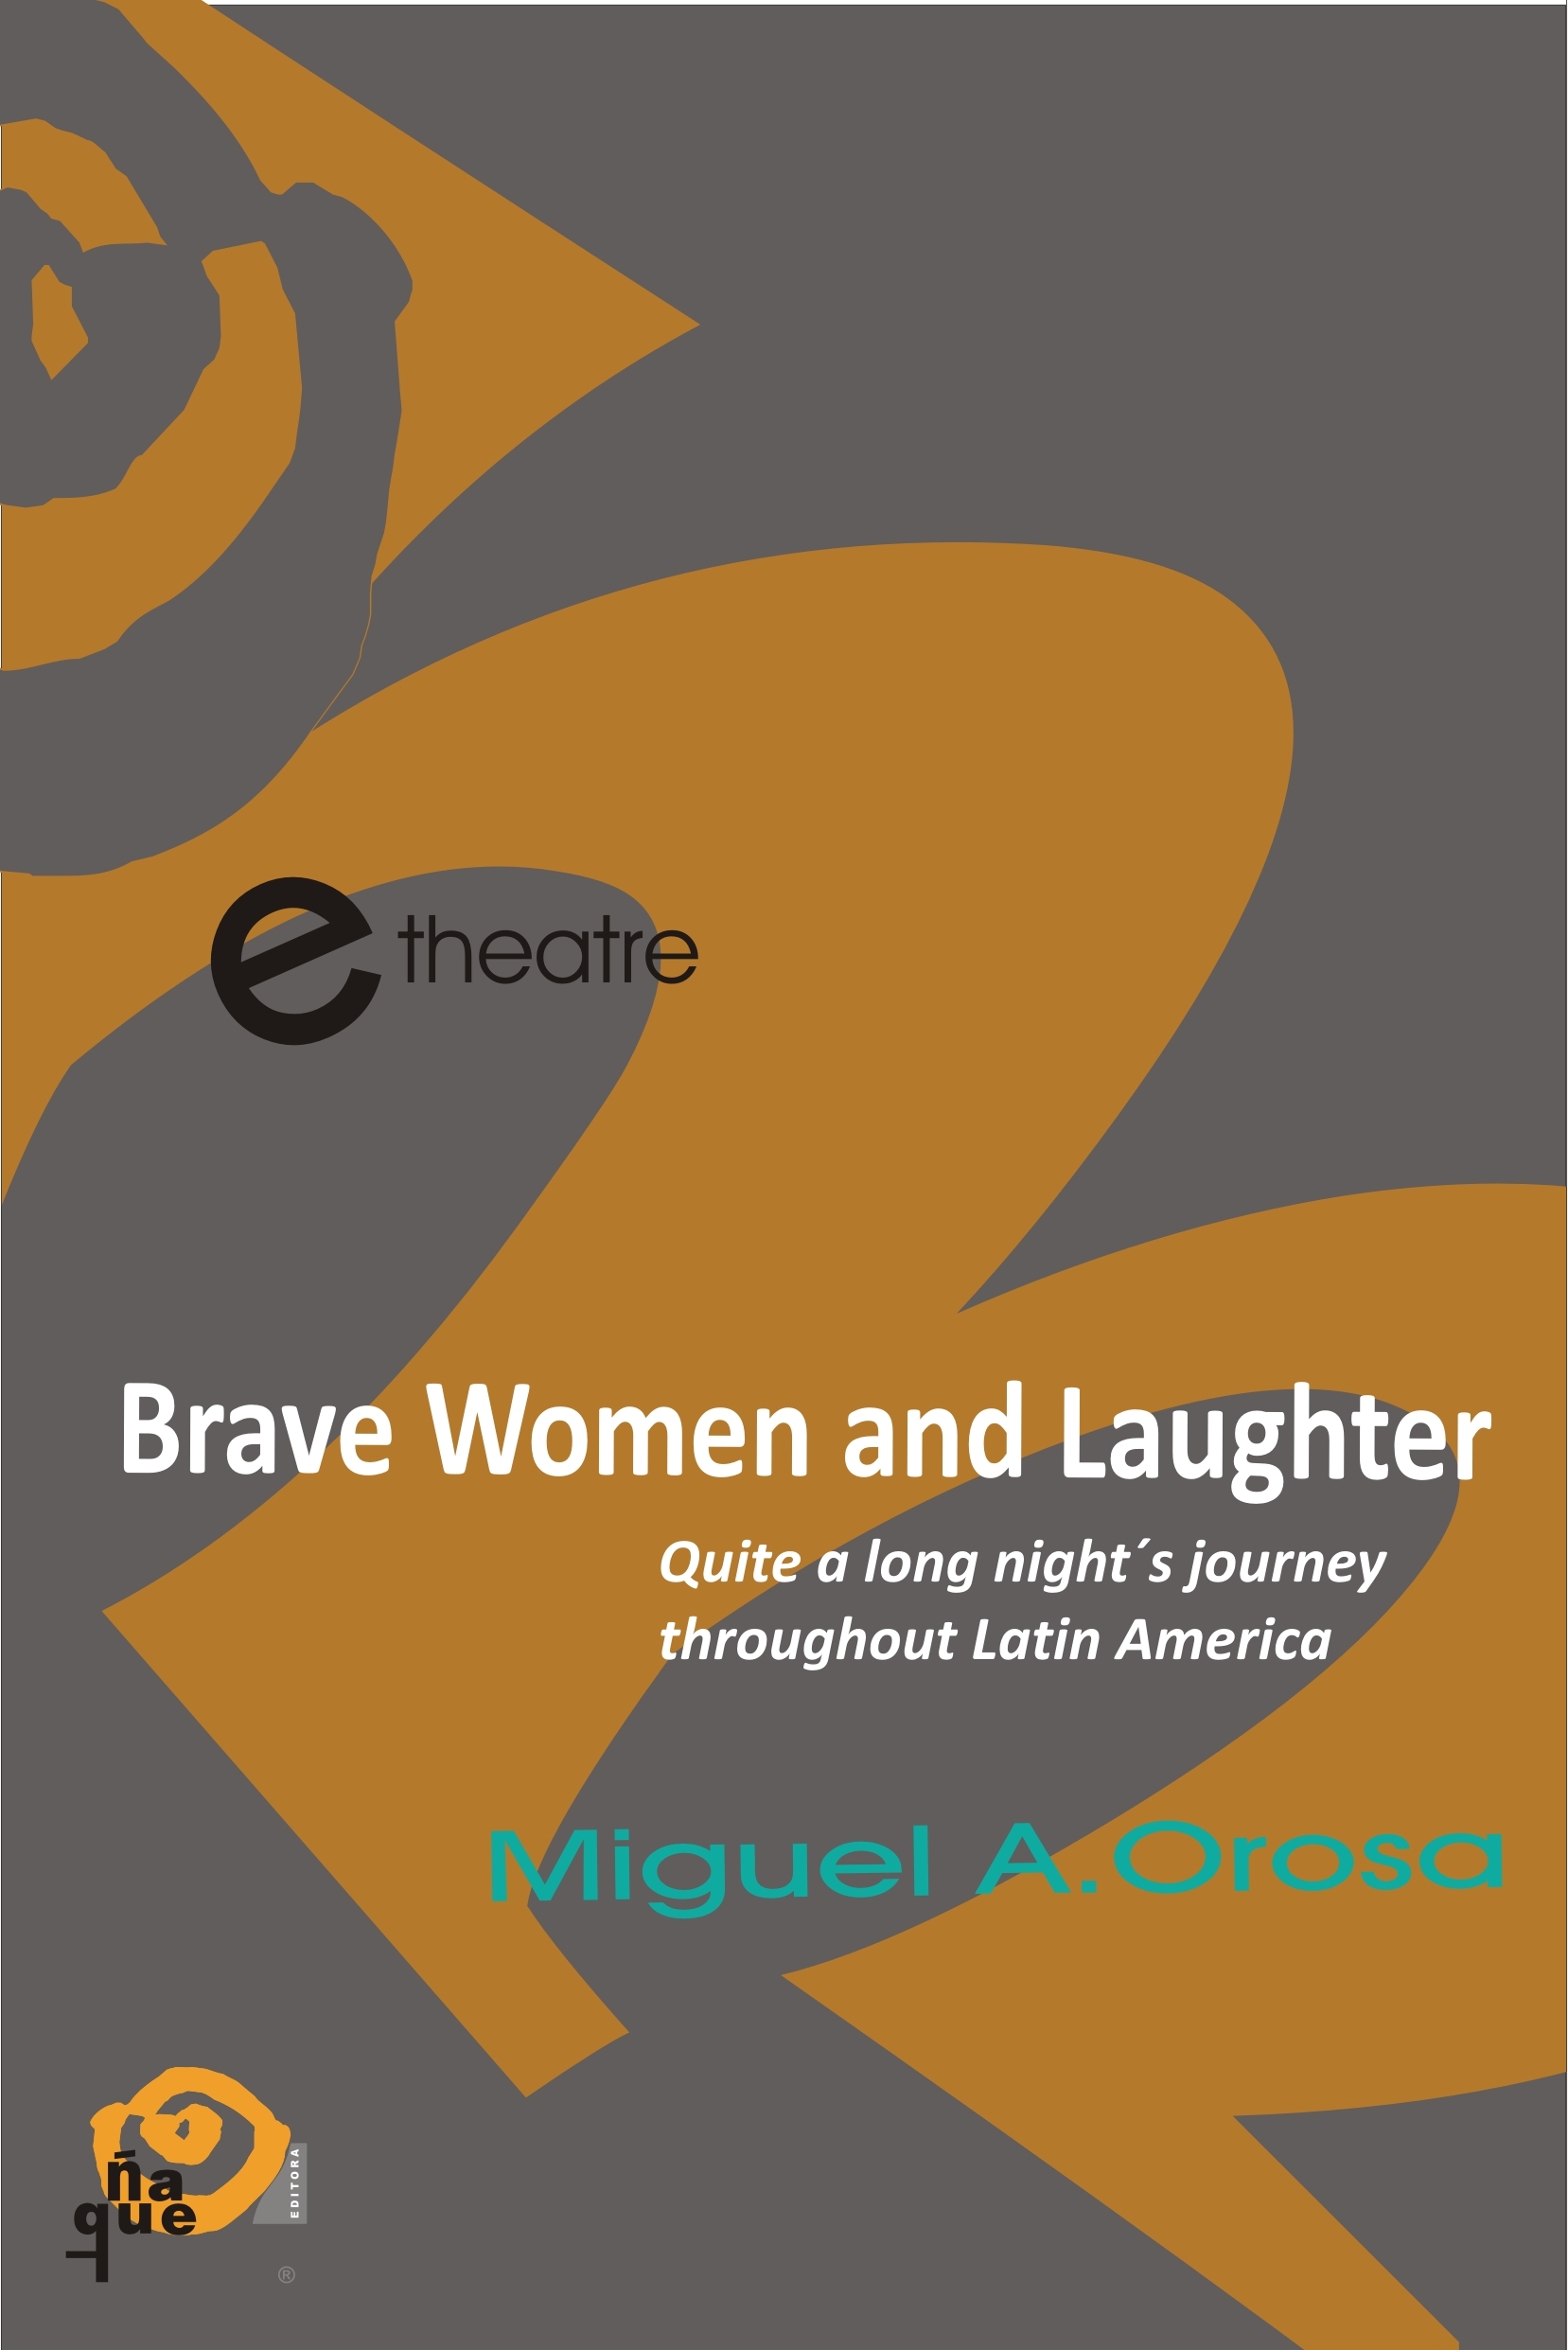 BRAVE WOMEN AND LAUGHTER